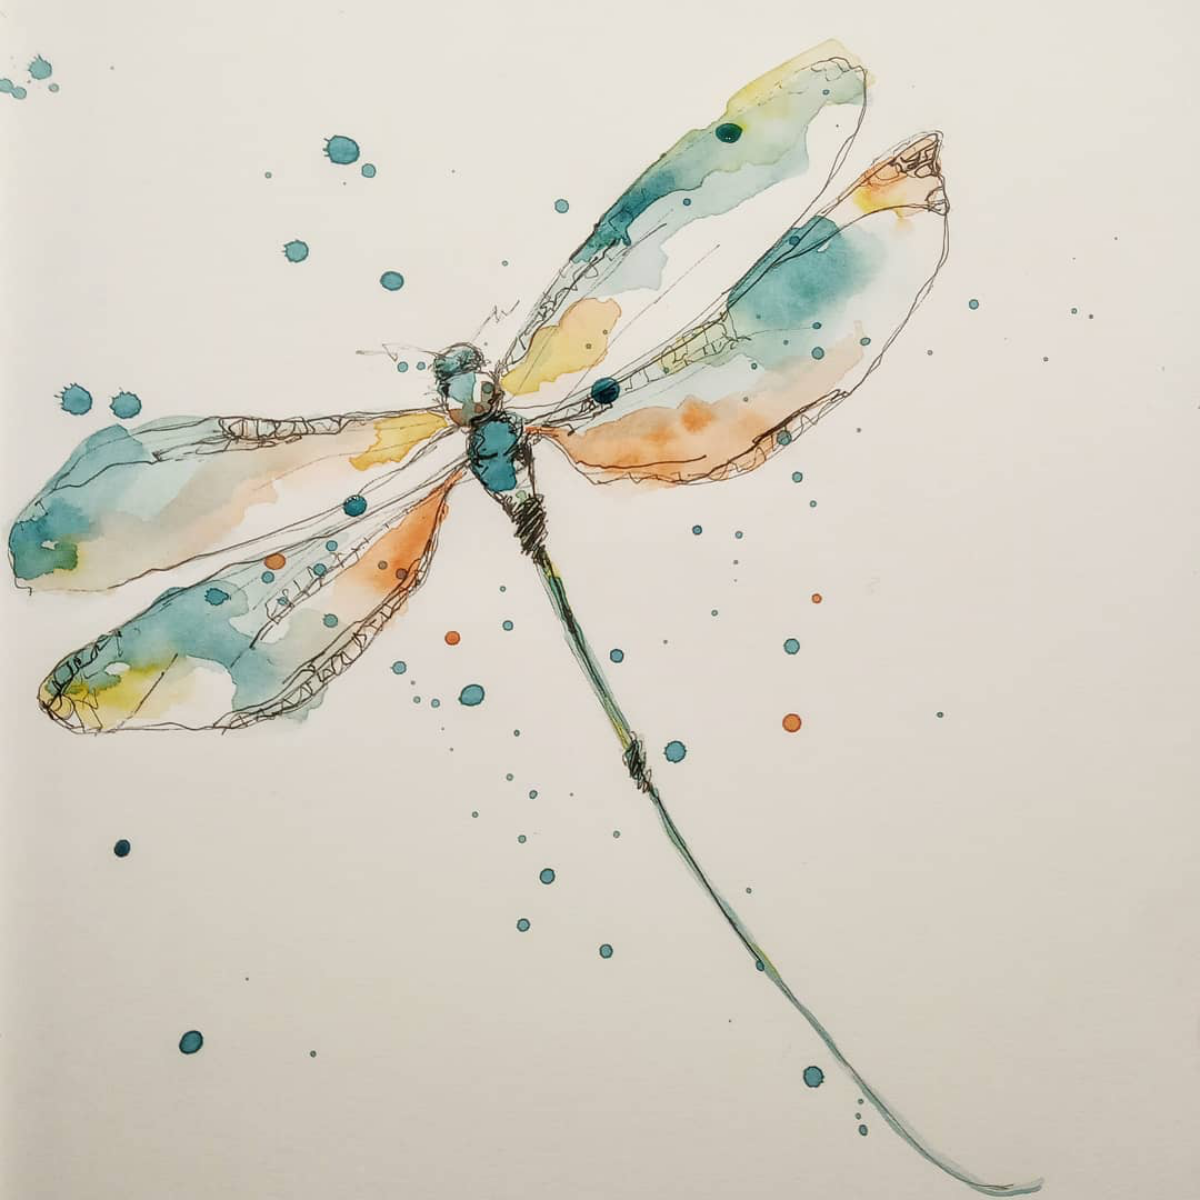 minimalistic watercolor drawing of a dragonfly